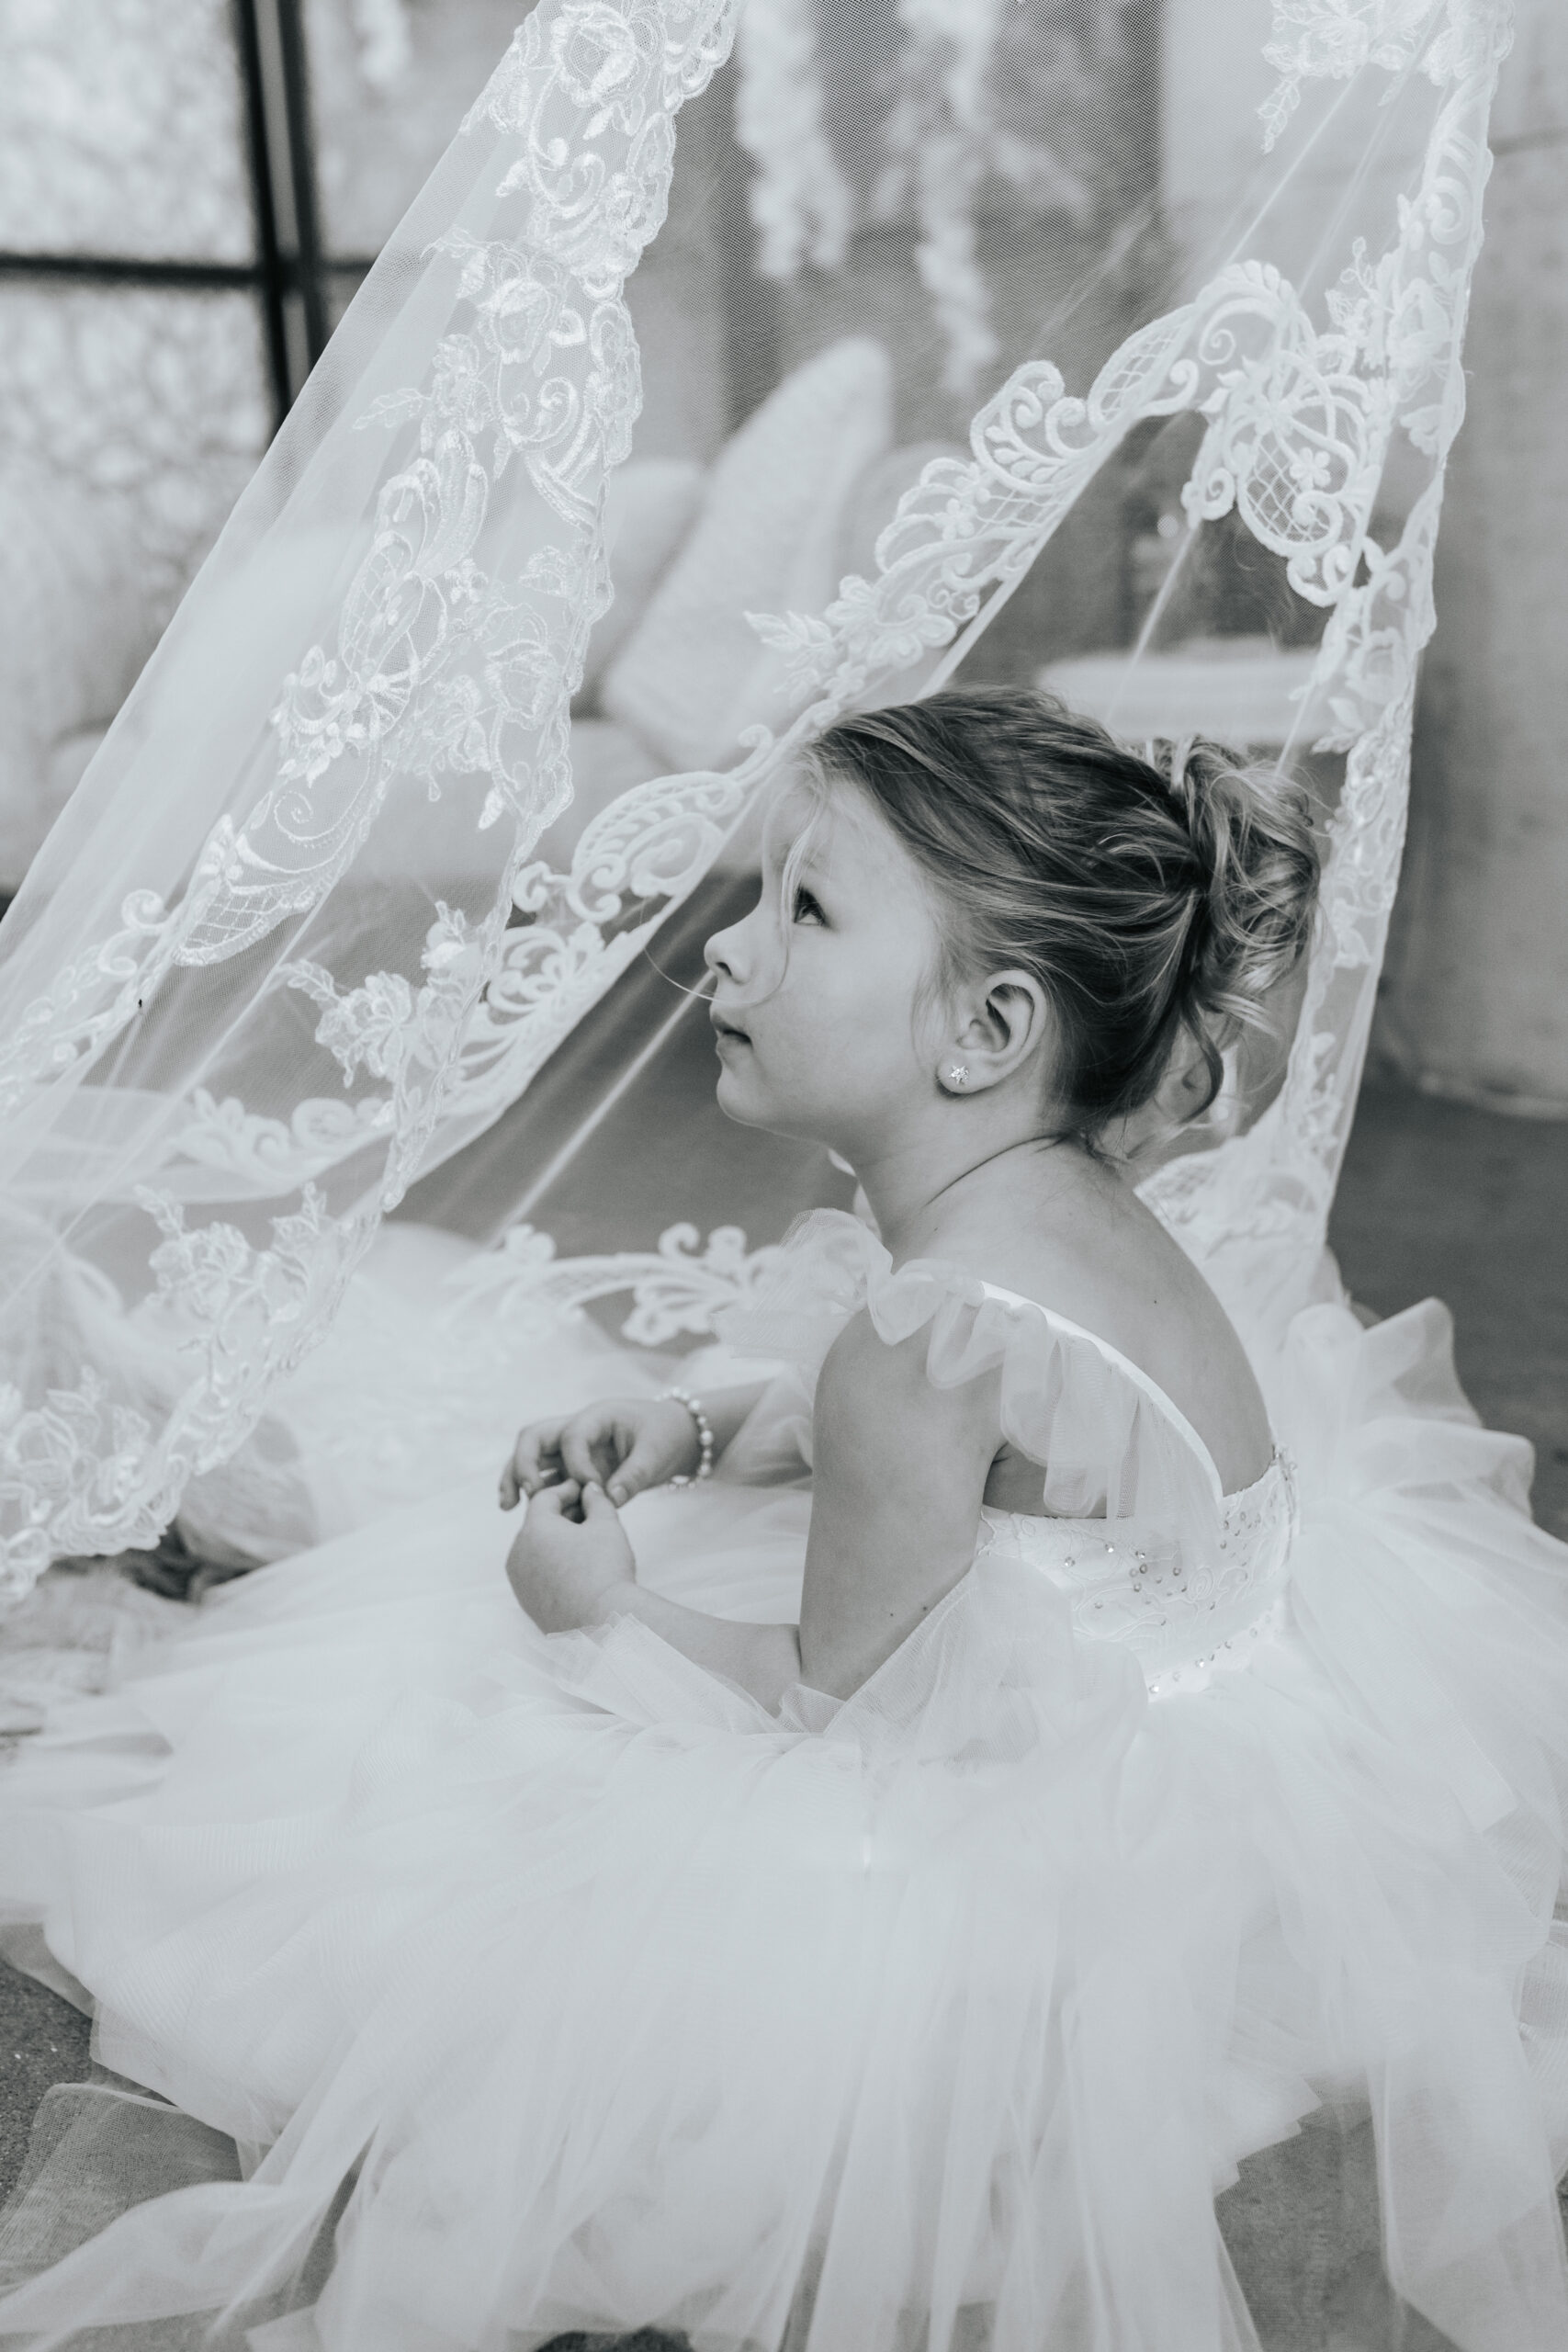 Flower girl peering up through white lace train of wedding gown. Photo from Missouri Wedding Photographer Bailey Morris.